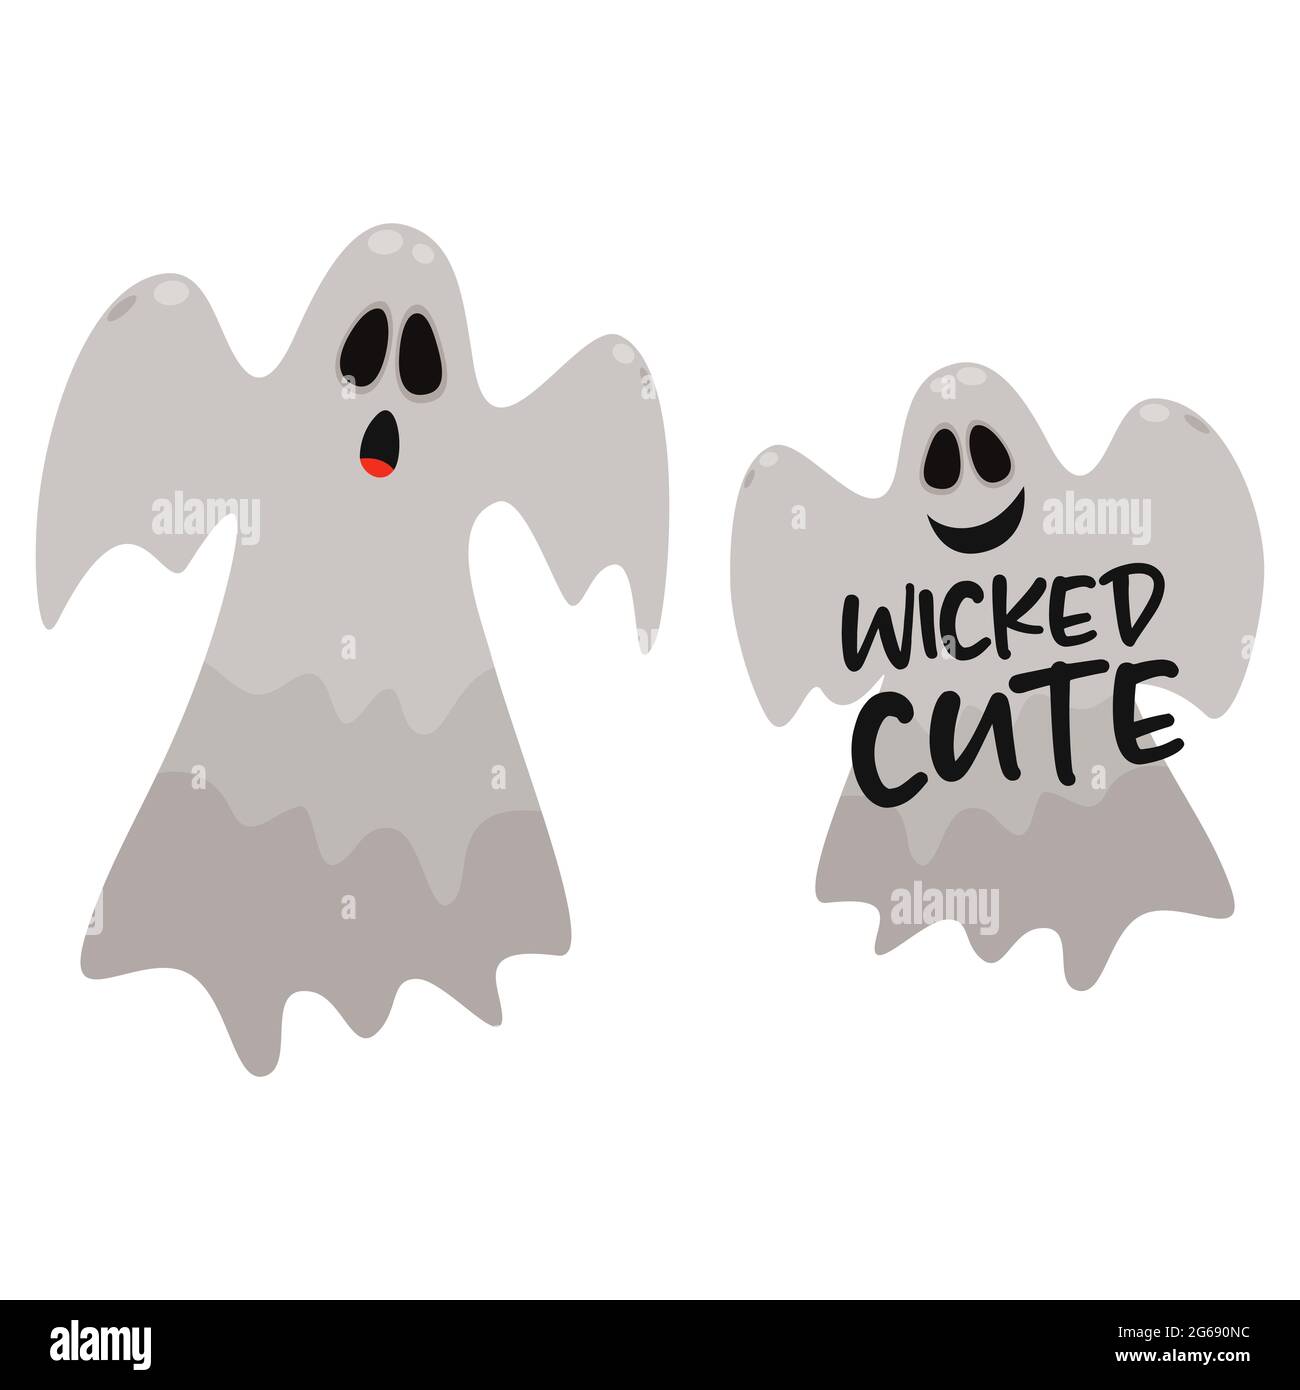 Halloween ghosts. Wicked cute text. Vector illustration. Stock Vector